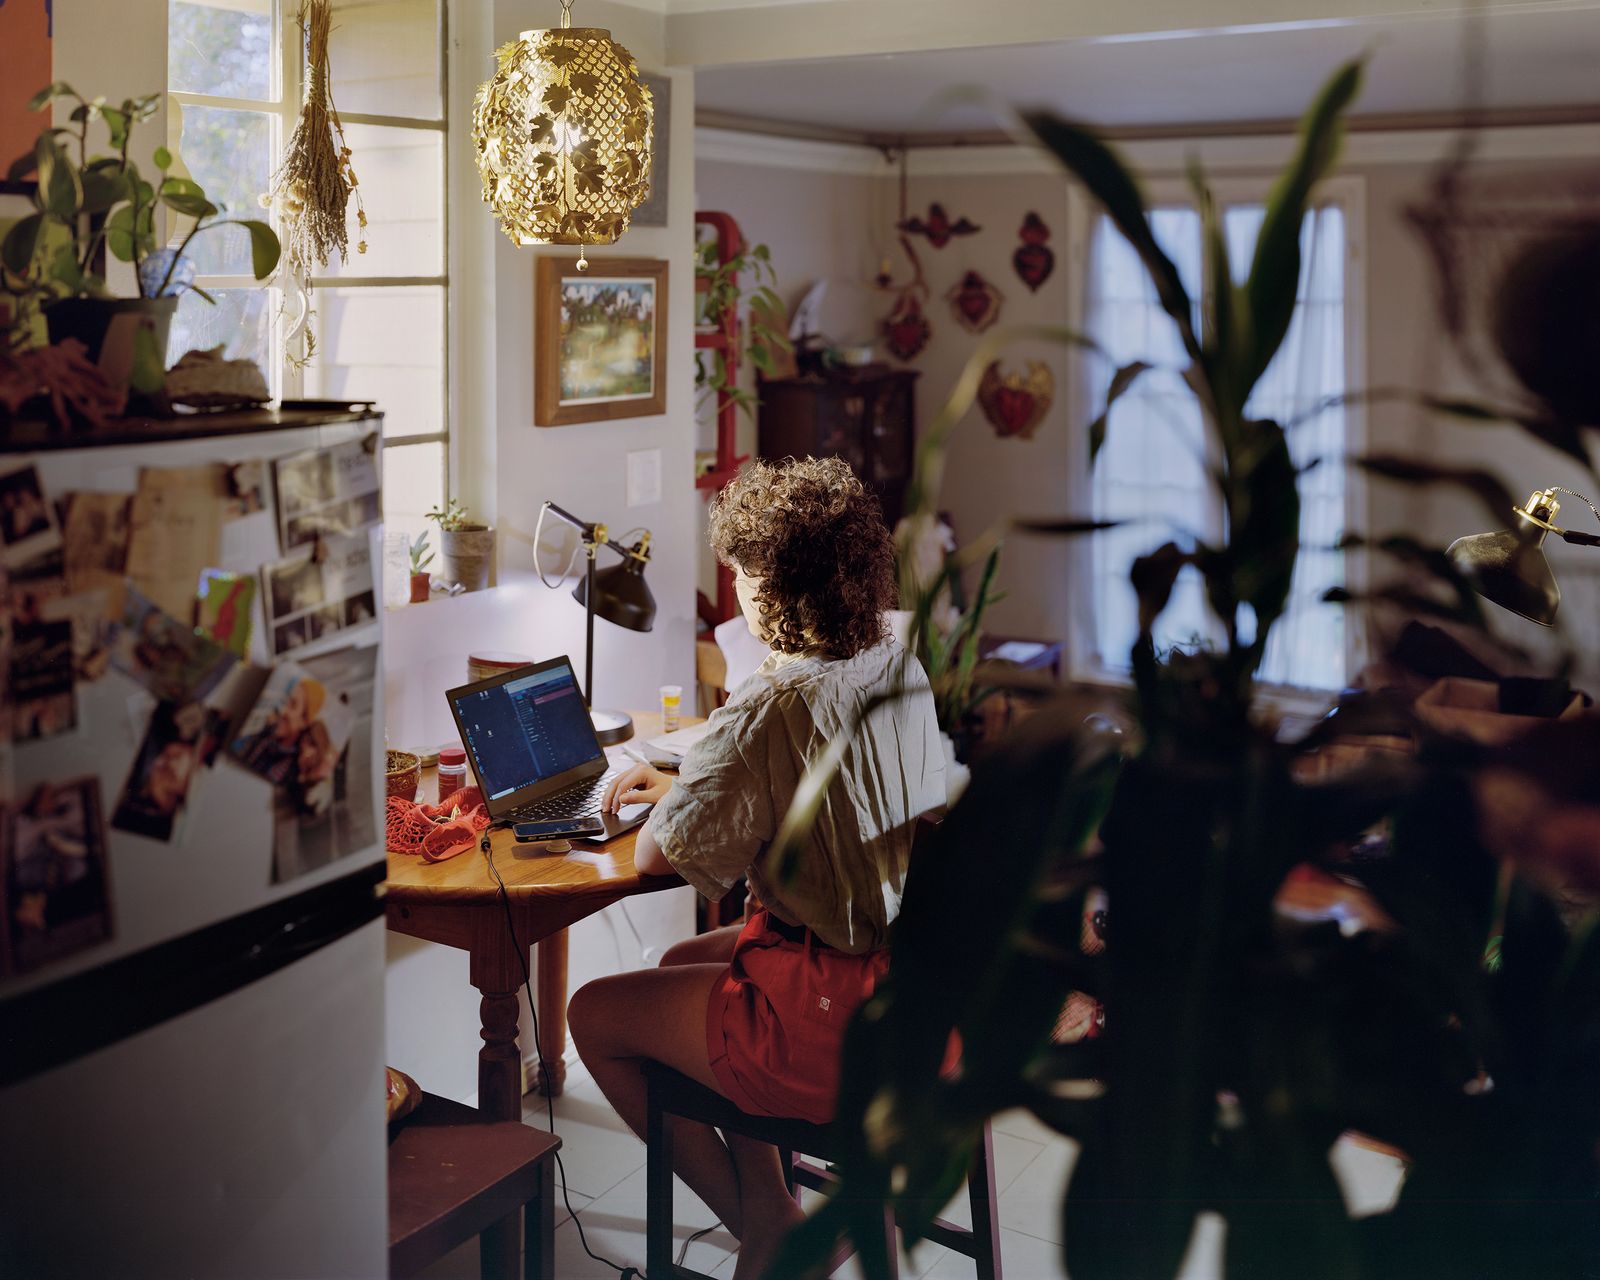 © Paloma Dooley - J. Working from Home